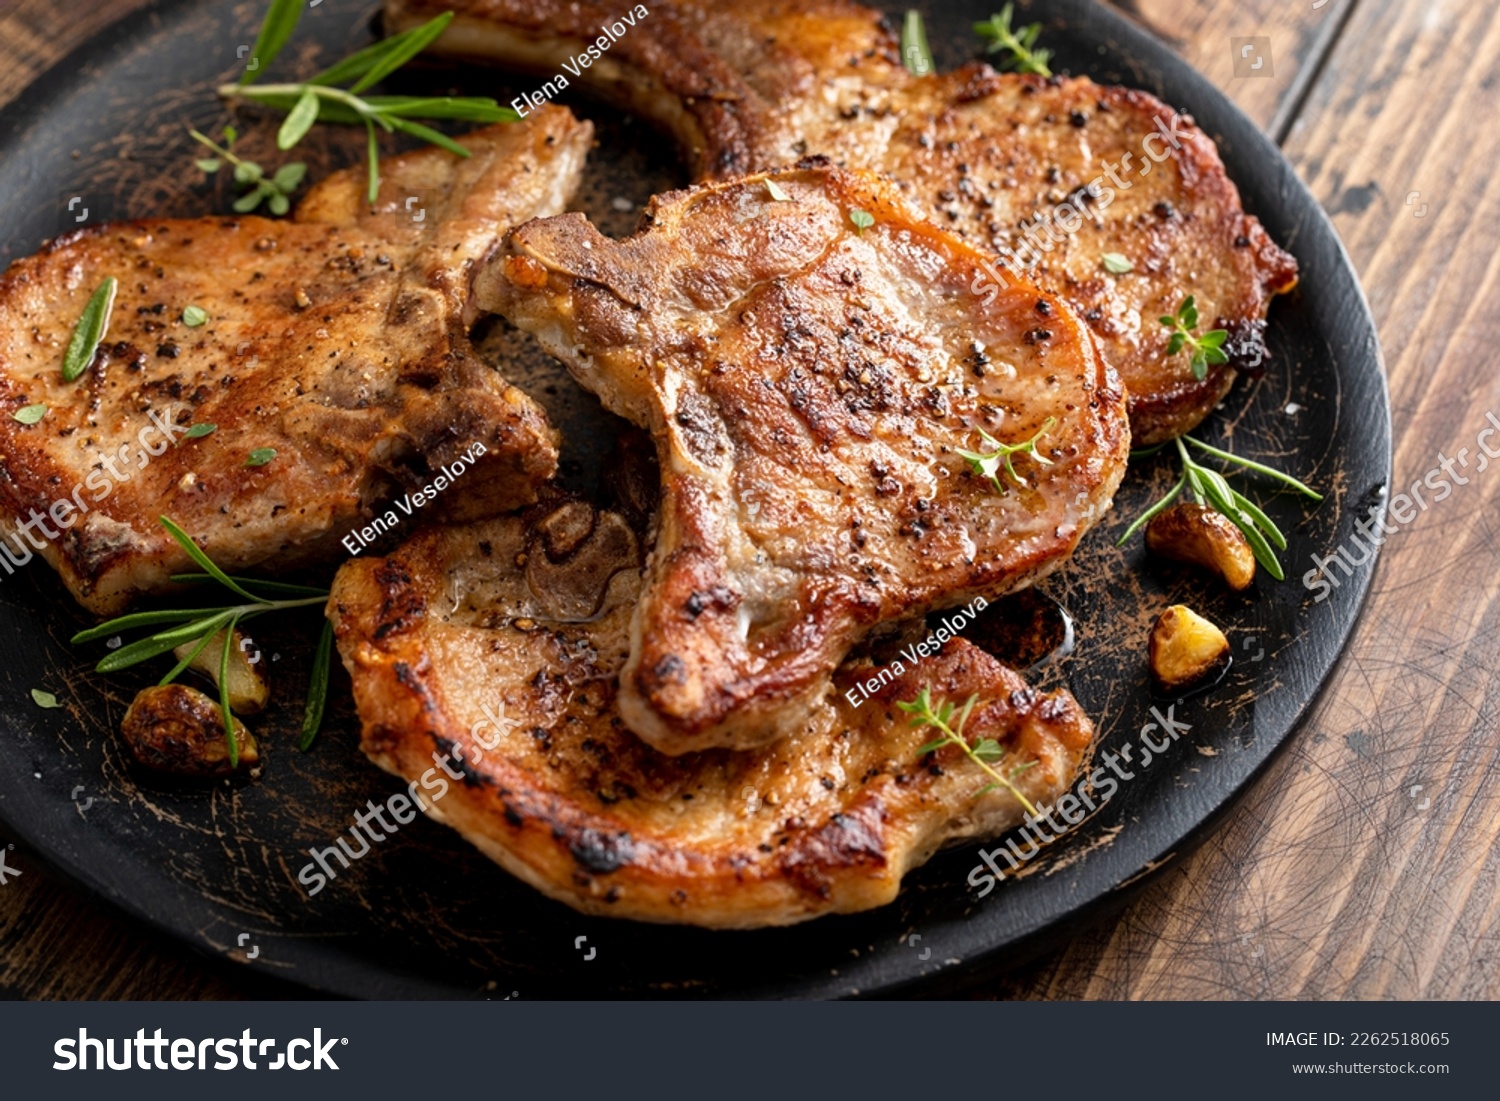 Pork chops grilled or seared with garlic and herbs bone in on a serving plate #2262518065